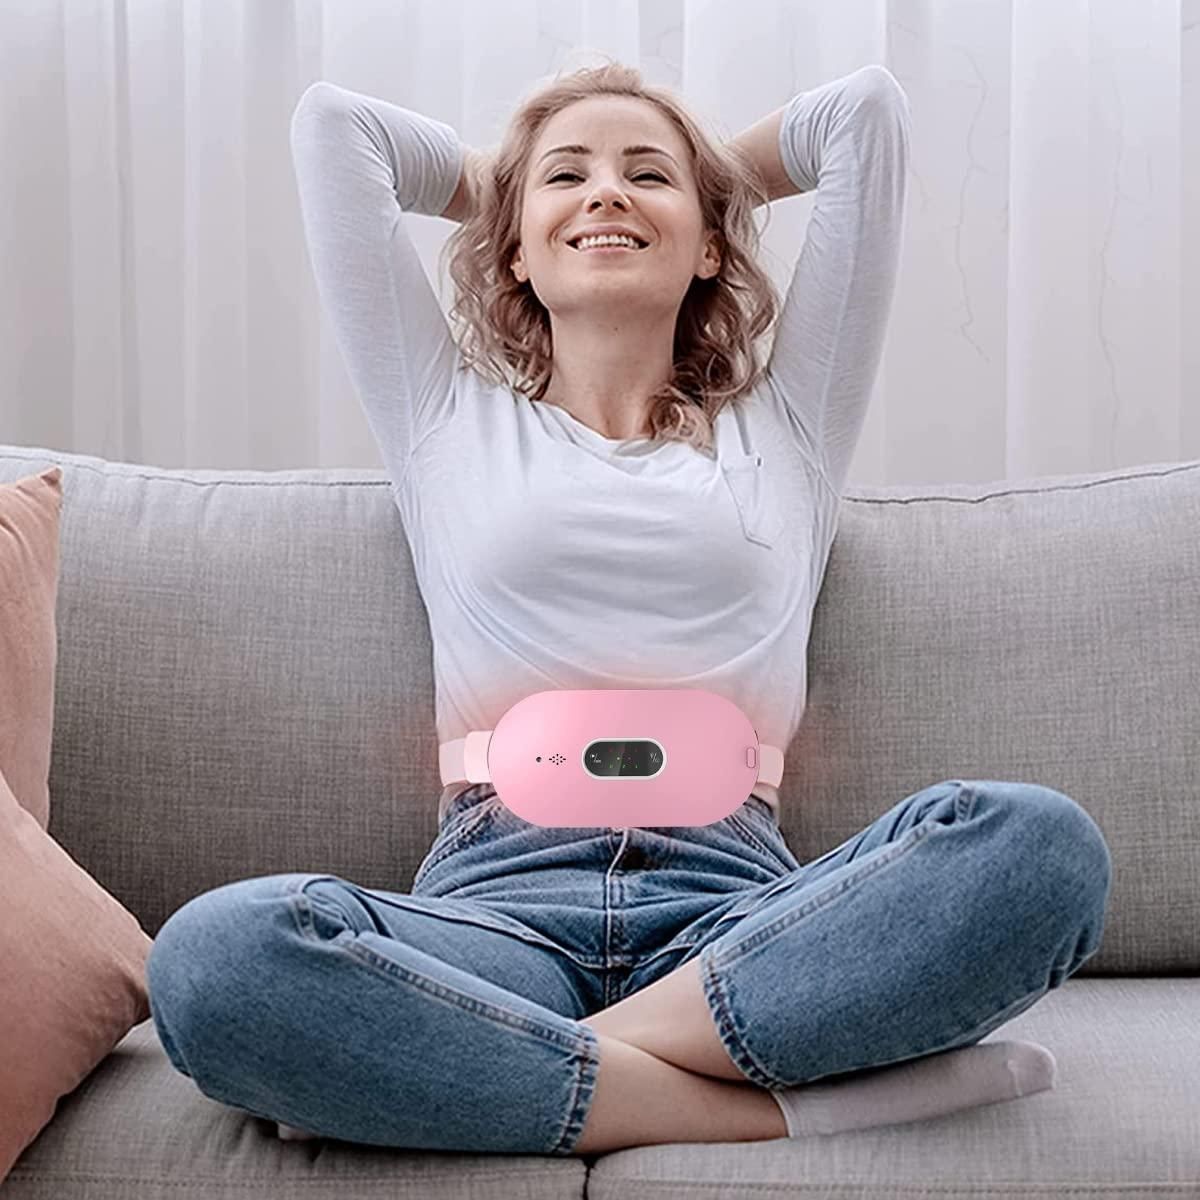 Electric Cordless Heating Pad for Period Pain